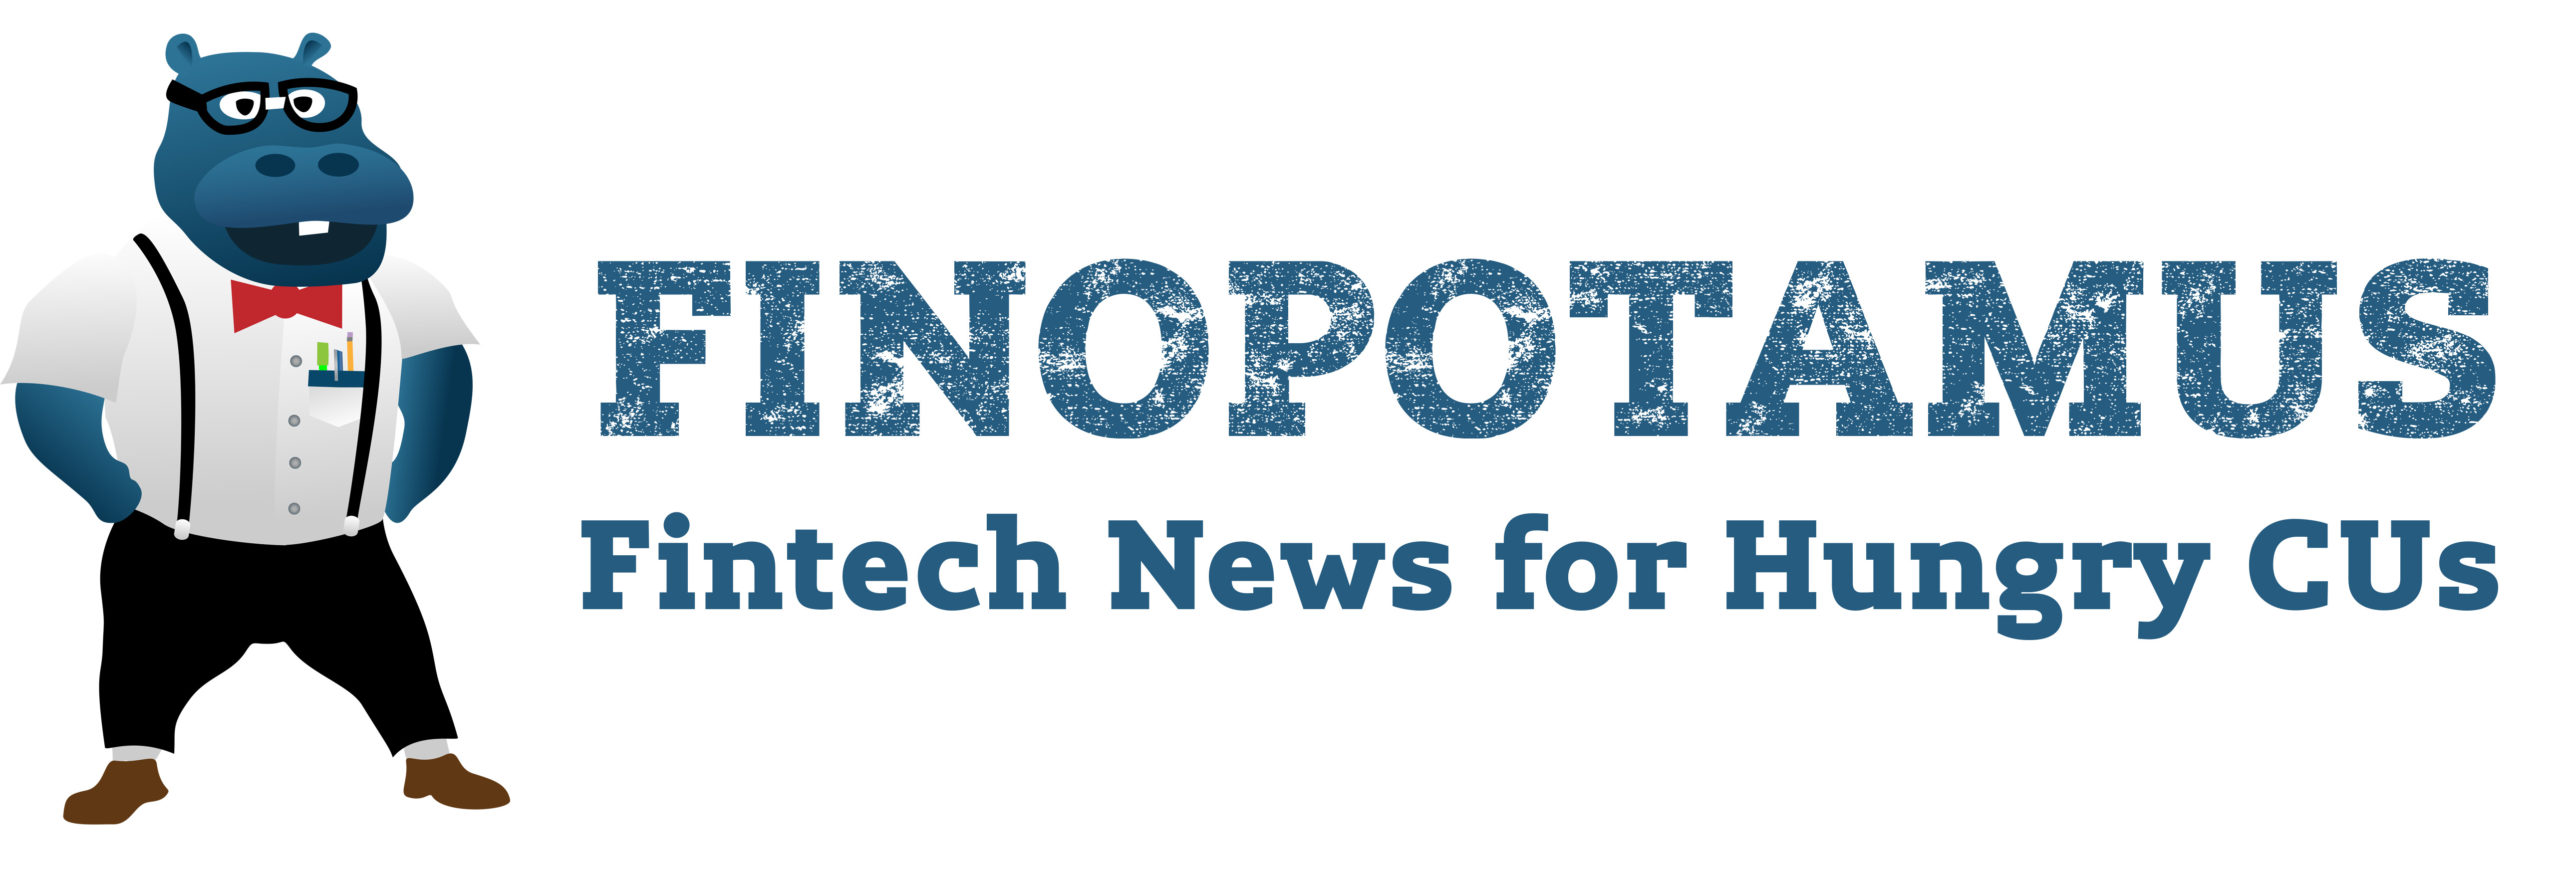 Samaha & Associates’ Adam Denbo, Disa D’Andrea, Tracy Helm, Janeace Liles and Olivia Reynolds Recognized in ‘Finopotamus Top 5’ Most Read Articles in 2022